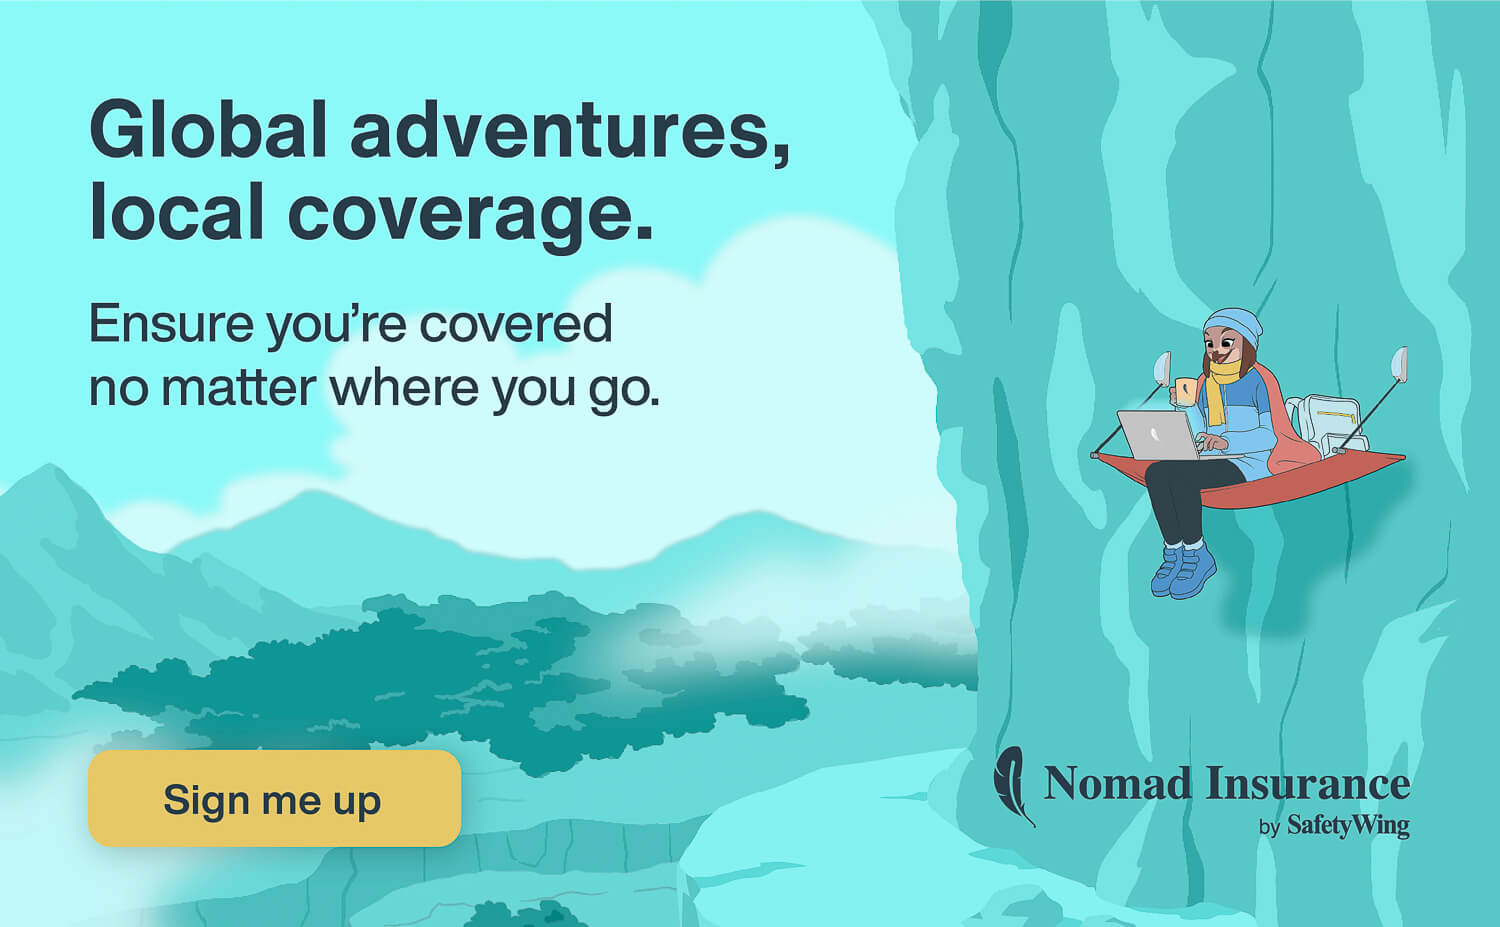 Nomad Insurance 2.0 by SafetyWing